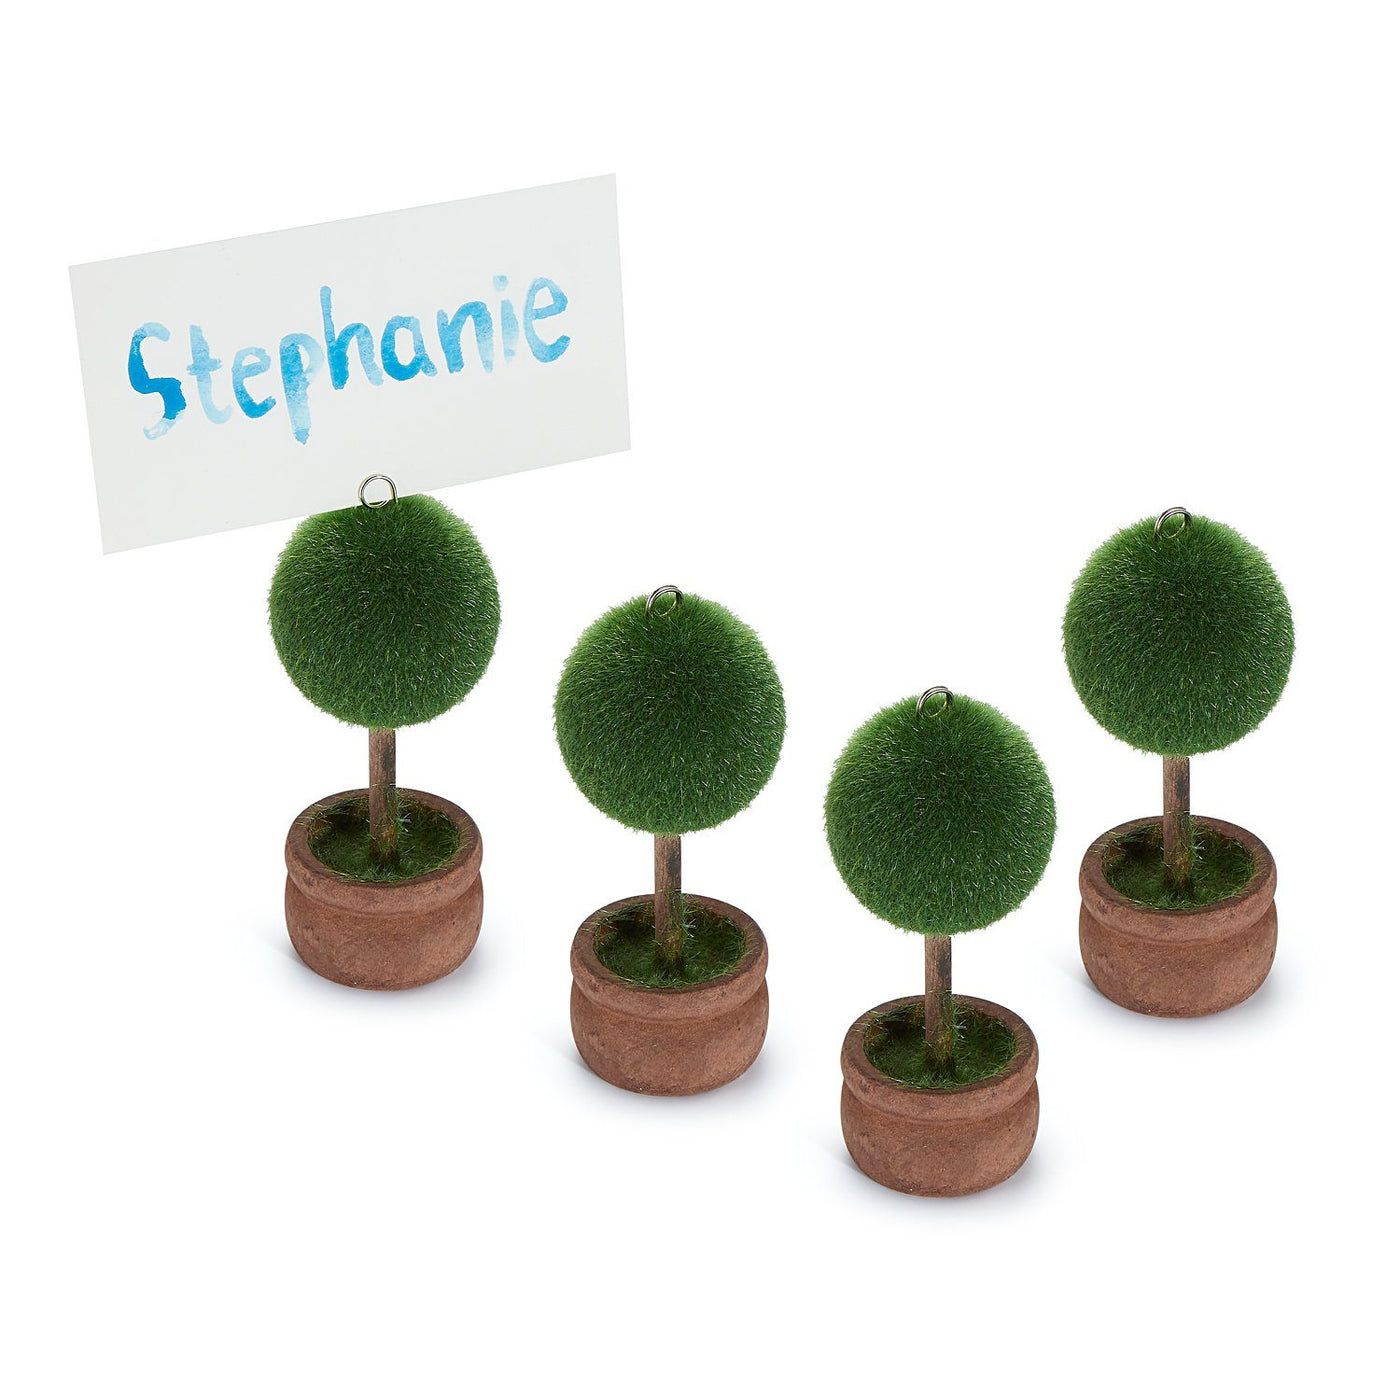 Topiary Placecard Holders, Set of 4 Chefanie 